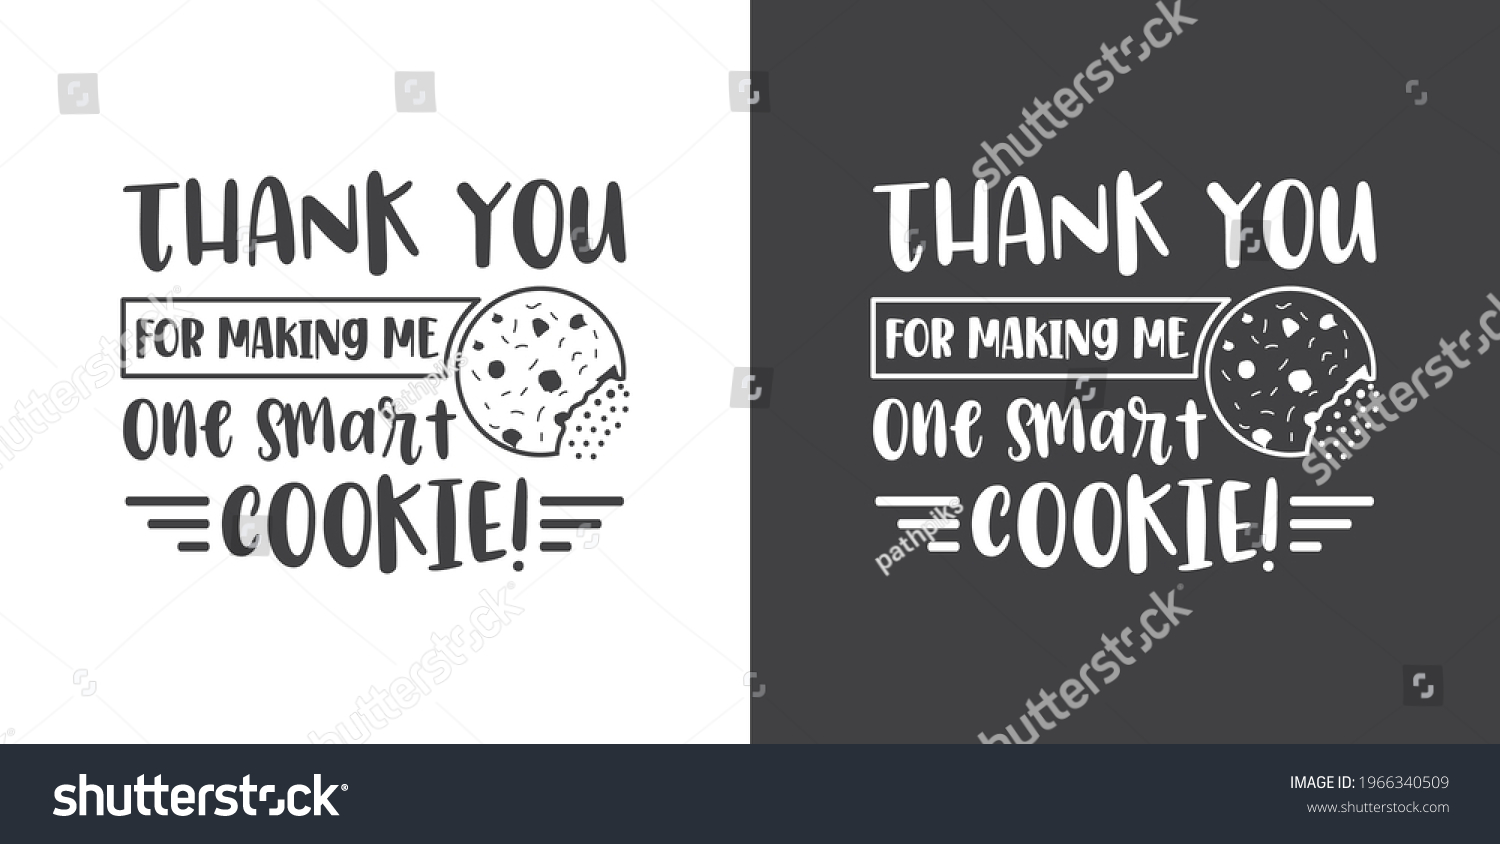 SVG of Printable Tshirt Design, Thank You For Making Me One Smart Cookie! svg